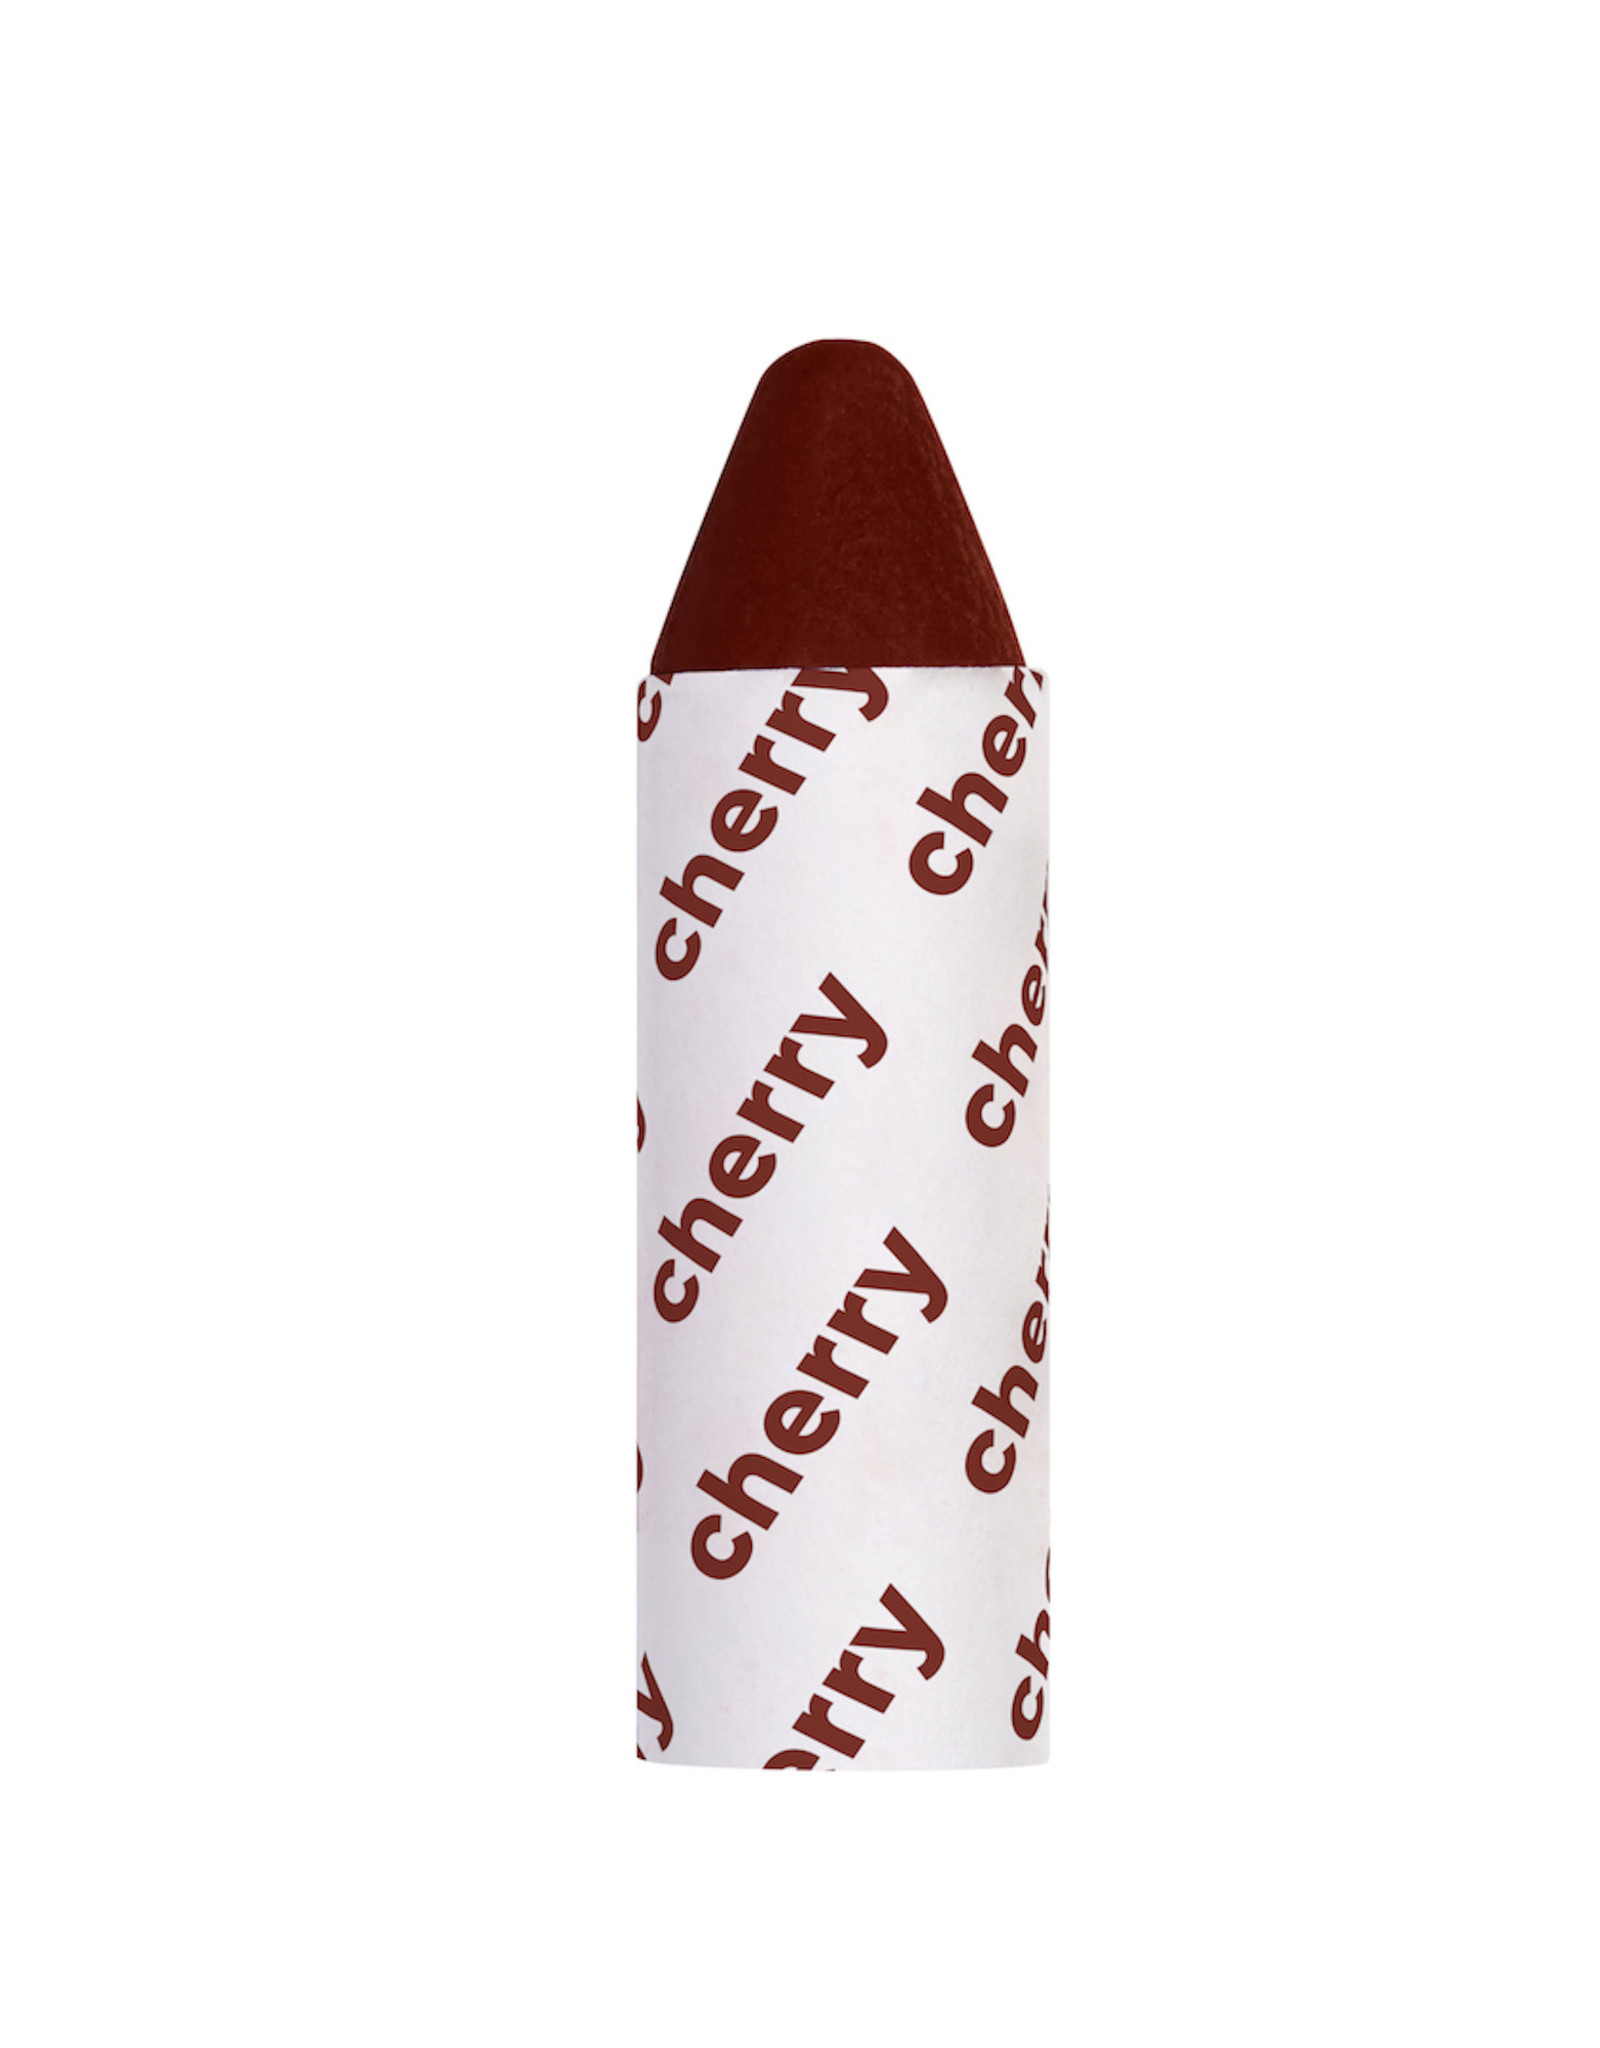 Axiology Lip to Lid Balmie - Cherry